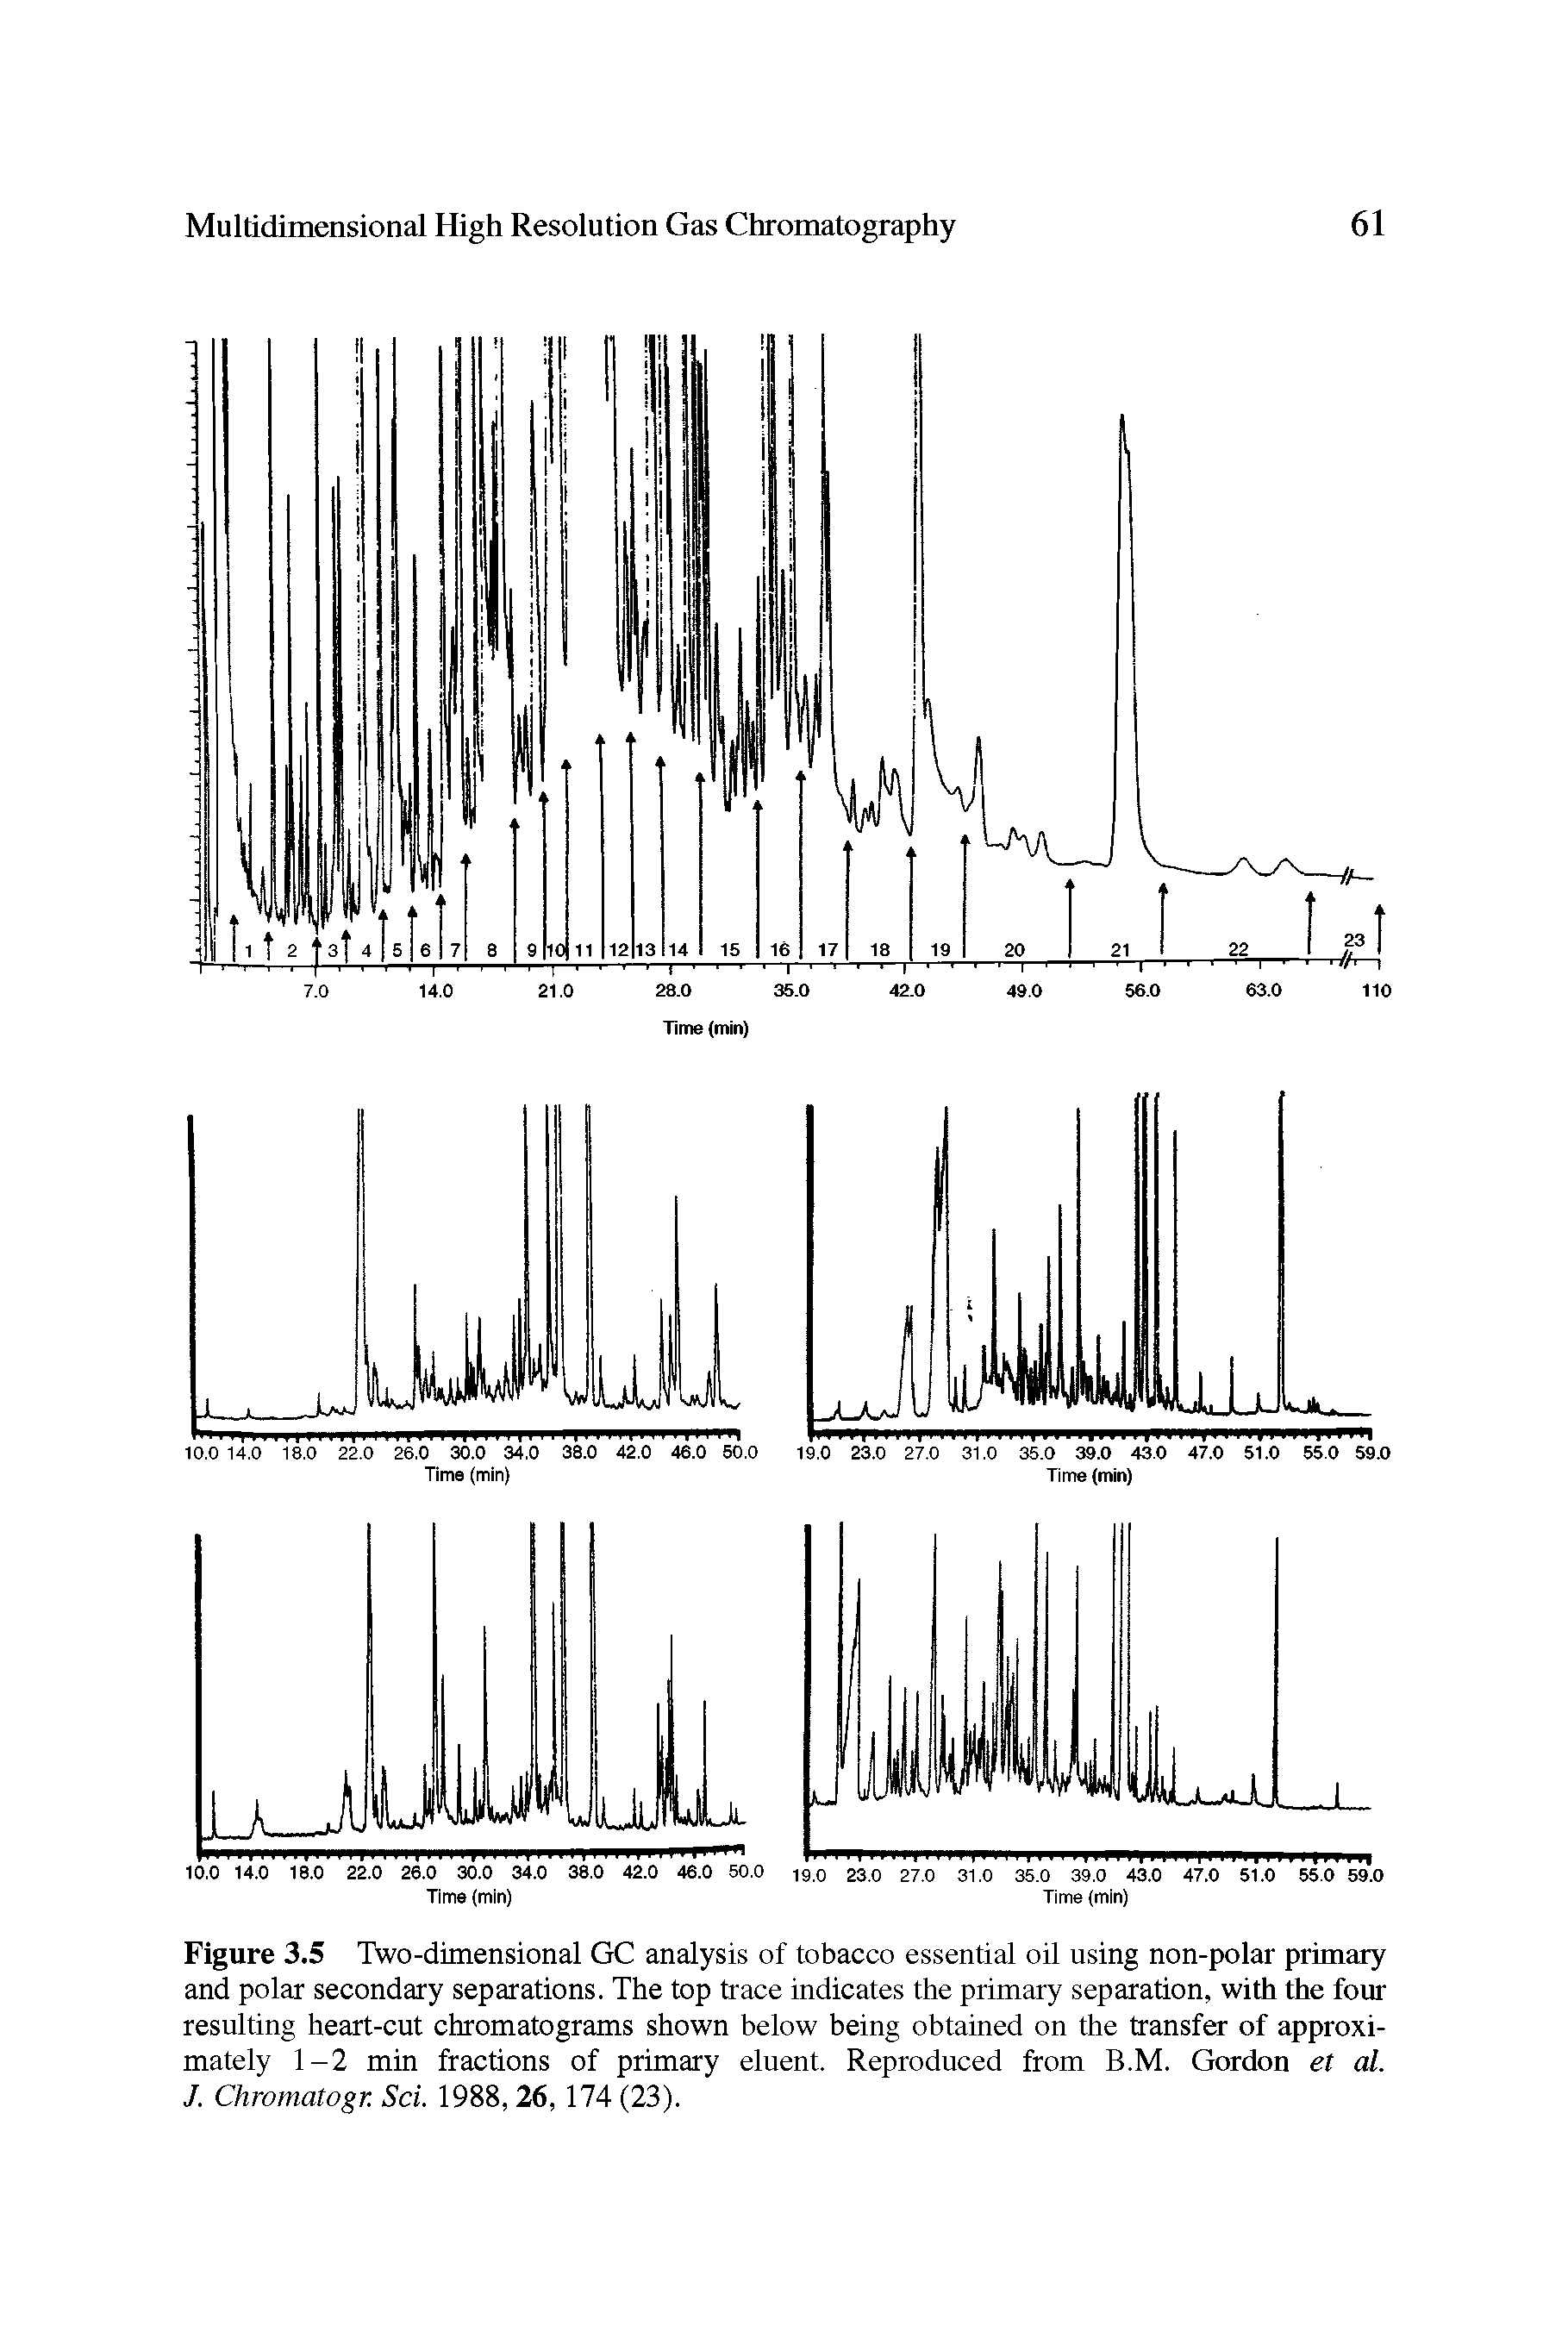 Figure 3.5 Two-dimensional GC analysis of tobacco essential oil using non-polar primary and polar secondary separations. The top trace indicates the primary separation, with the four resulting heart-cut chromatograms shown below being obtained on the transfer of approximately 1-2 min fractions of primary eluent. Reproduced from B.M. Gordon et al. J. Chromatogr. Sci. 1988, 26, 174 (23).